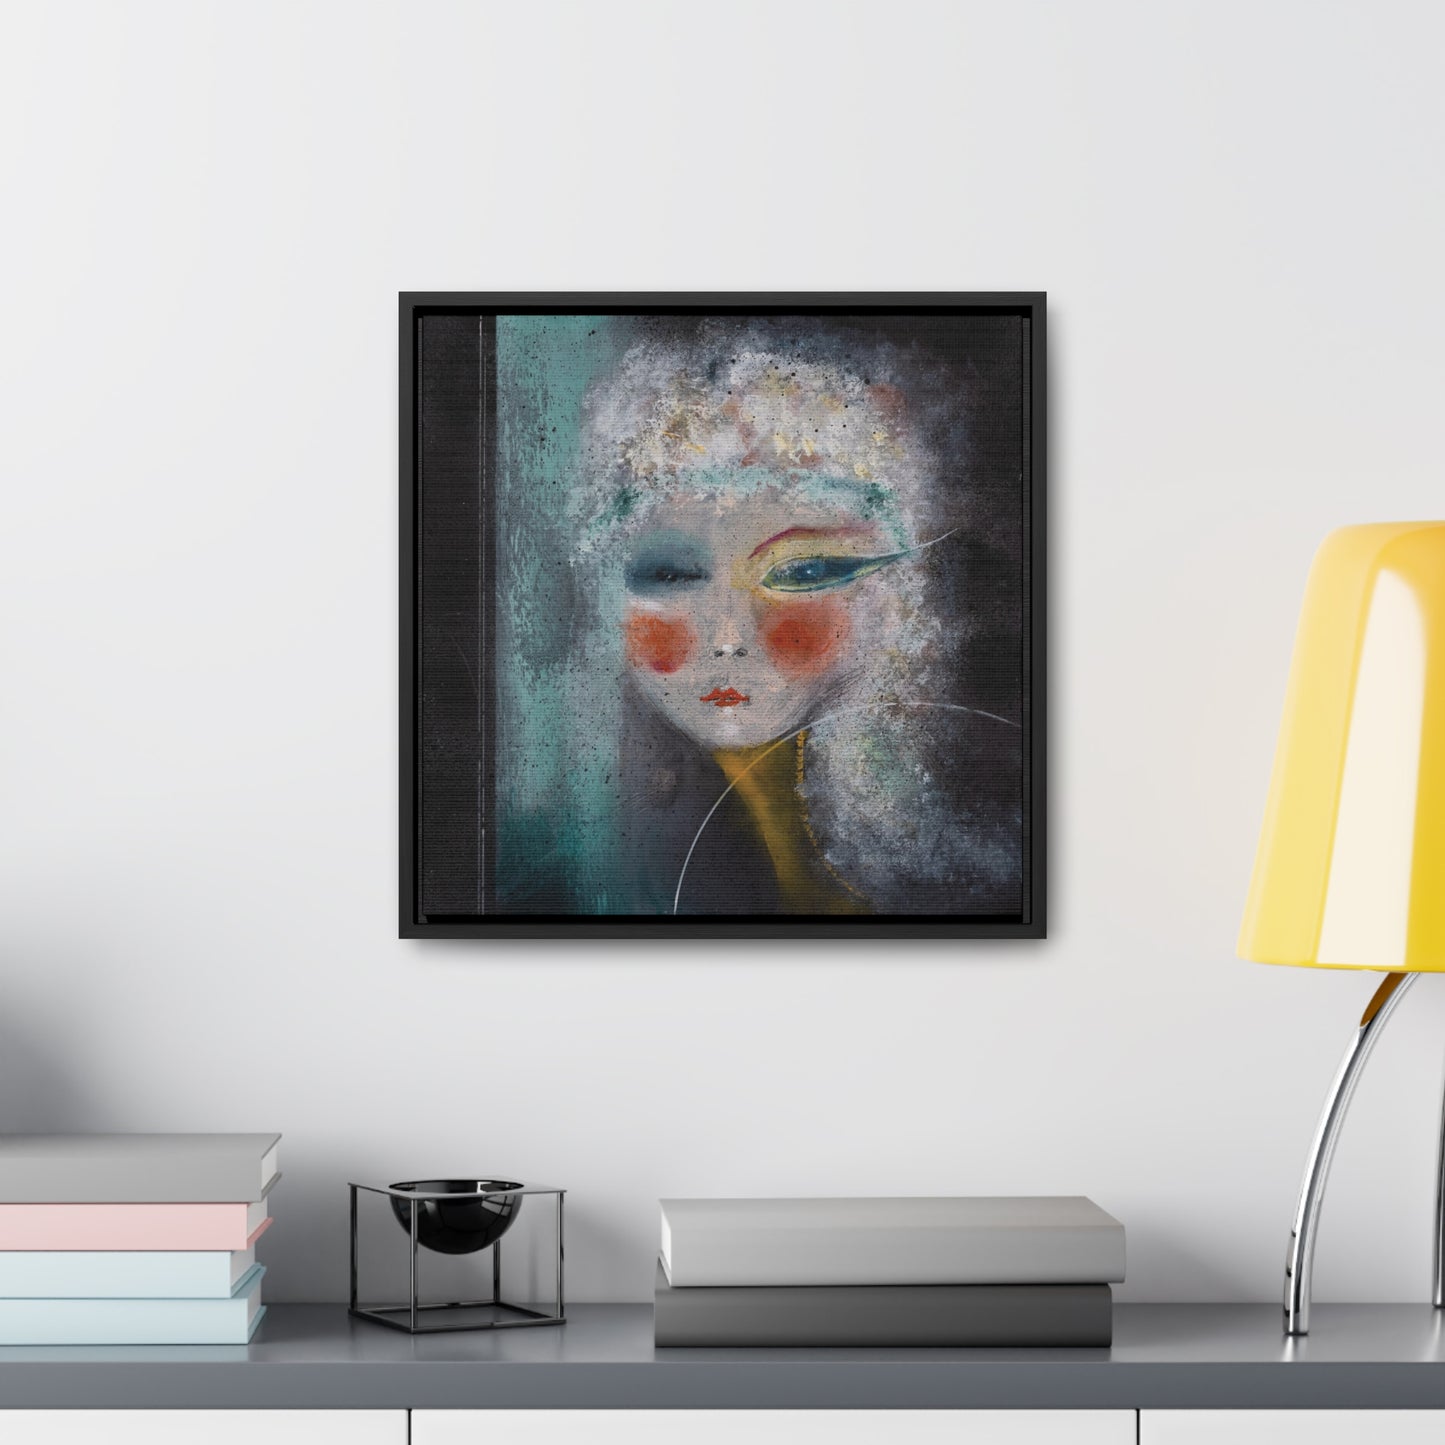 Empowering Asian-Inspired Art - 'Let Me Be Me' by Asia Popinska - Unique Woman's Portrait on Floating Gallery Canvas